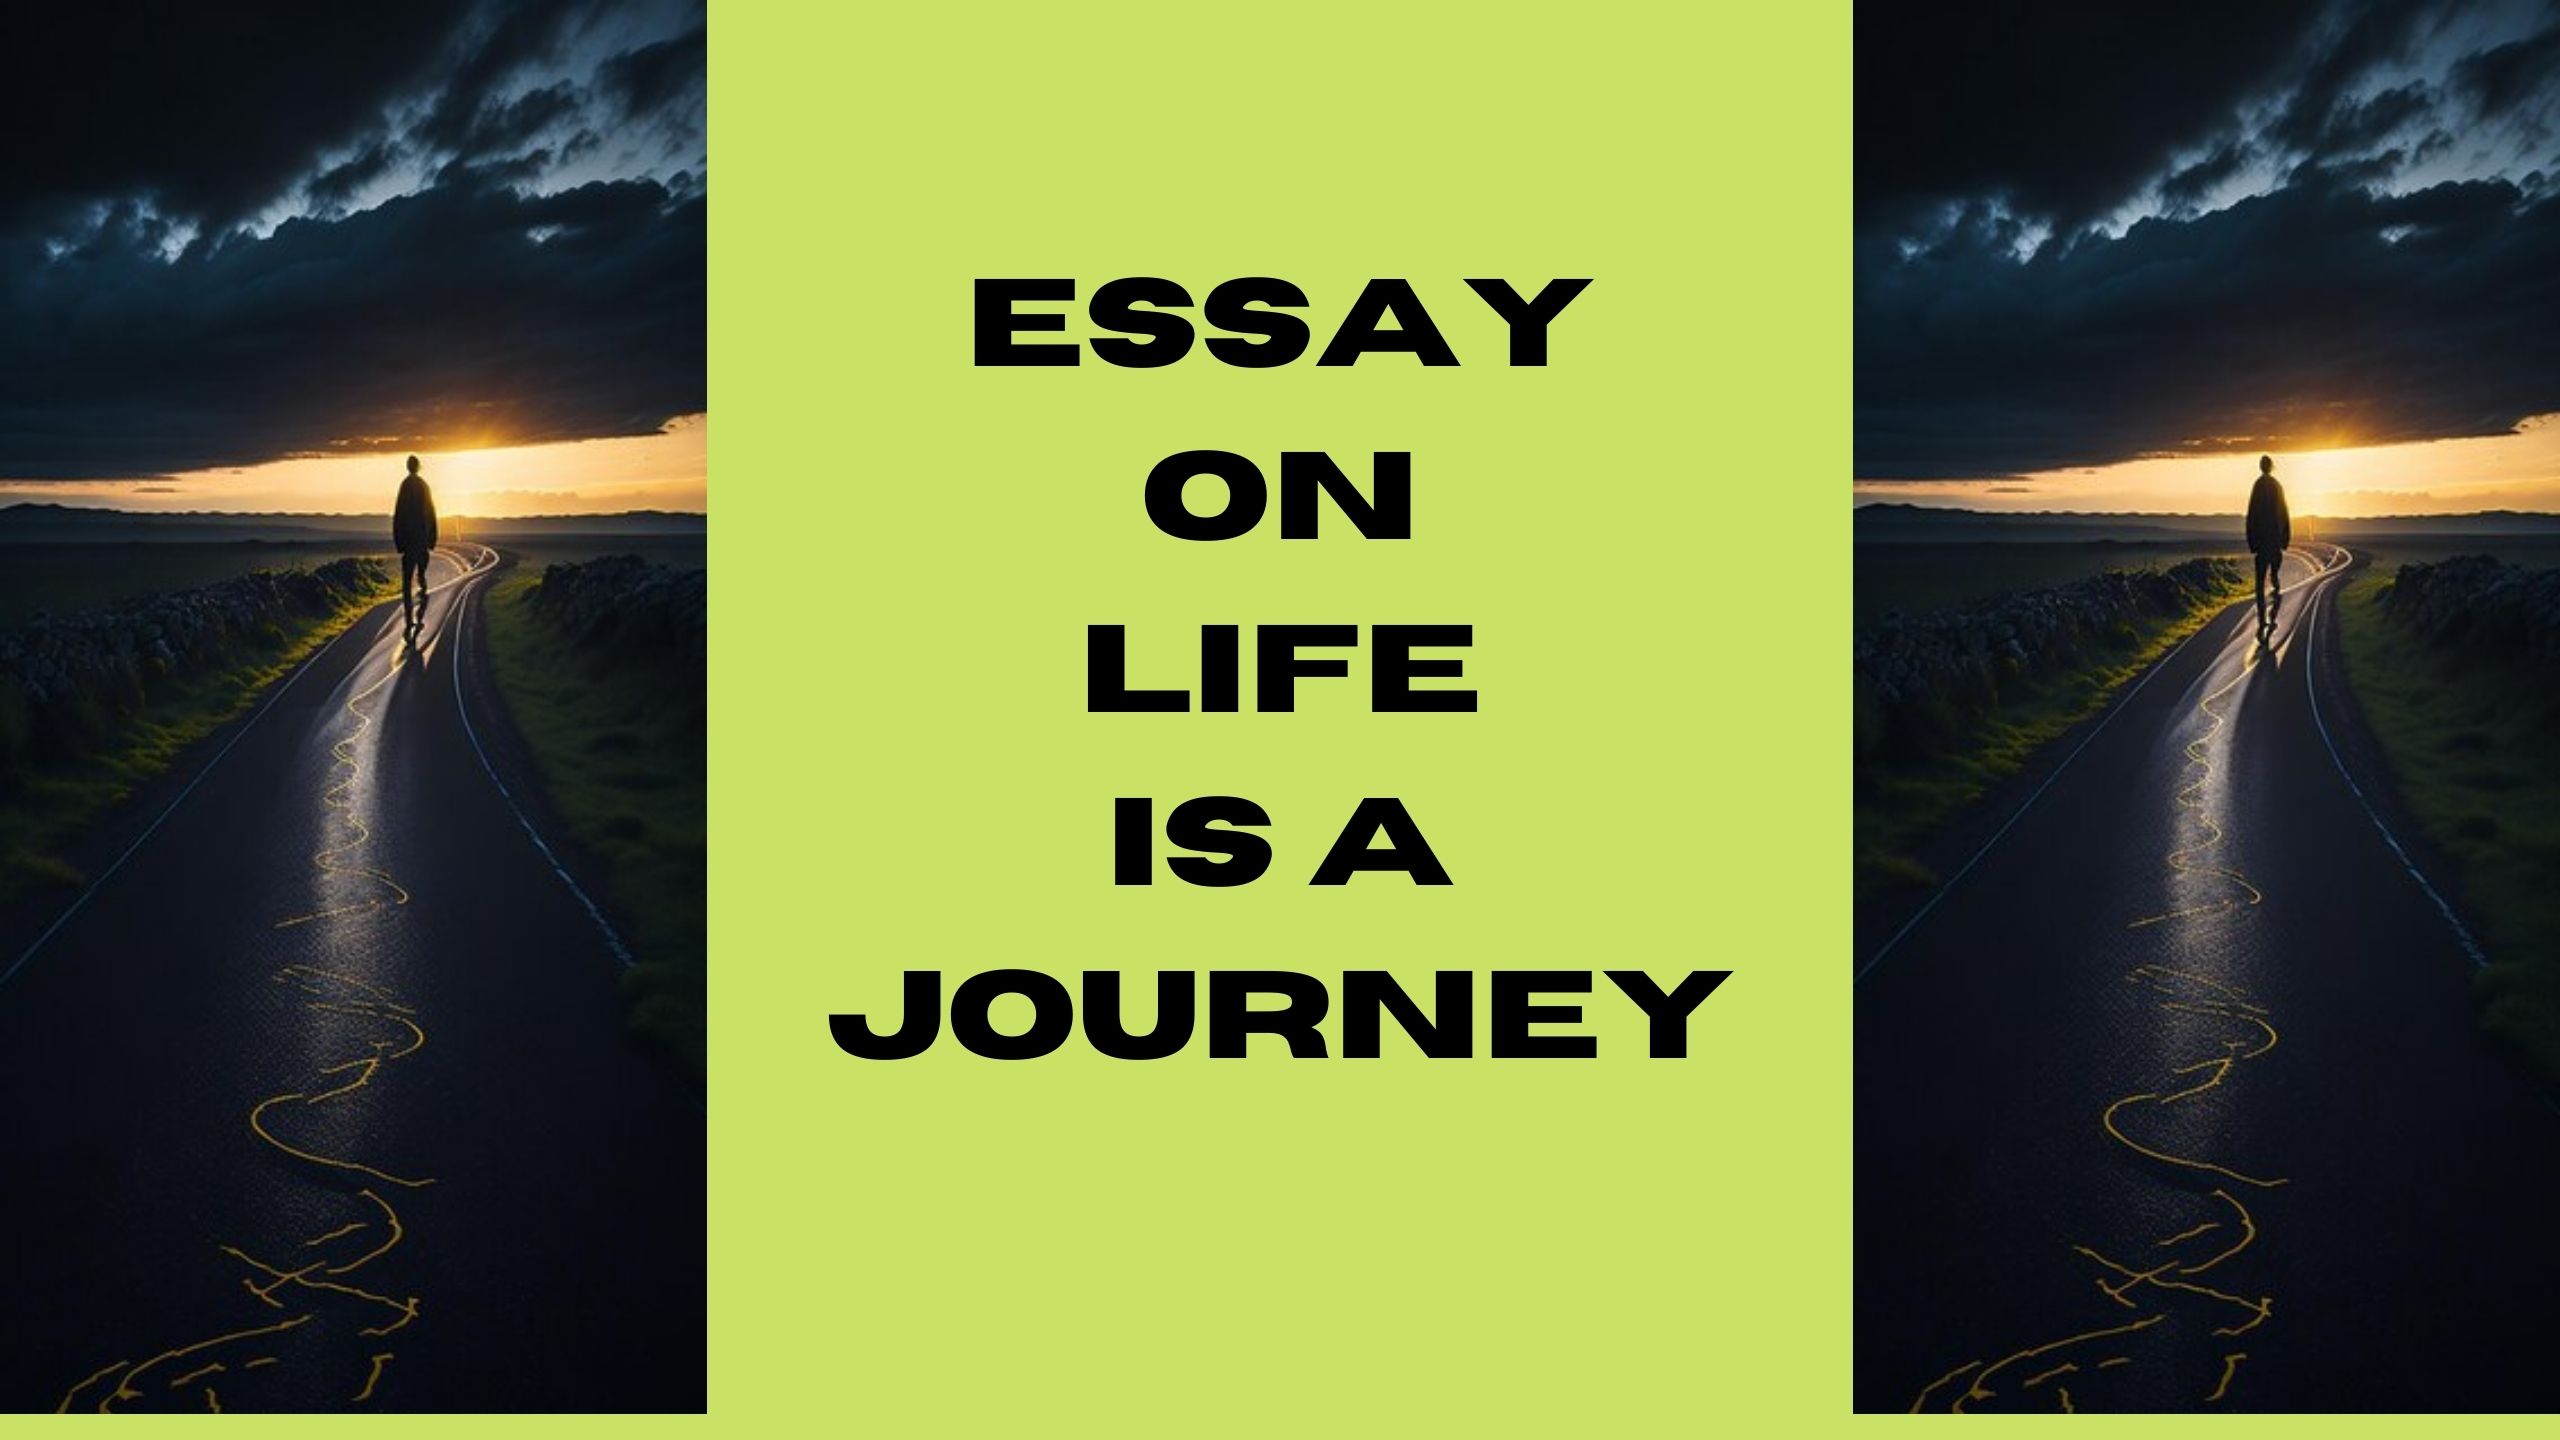 Essay on Life is a journey